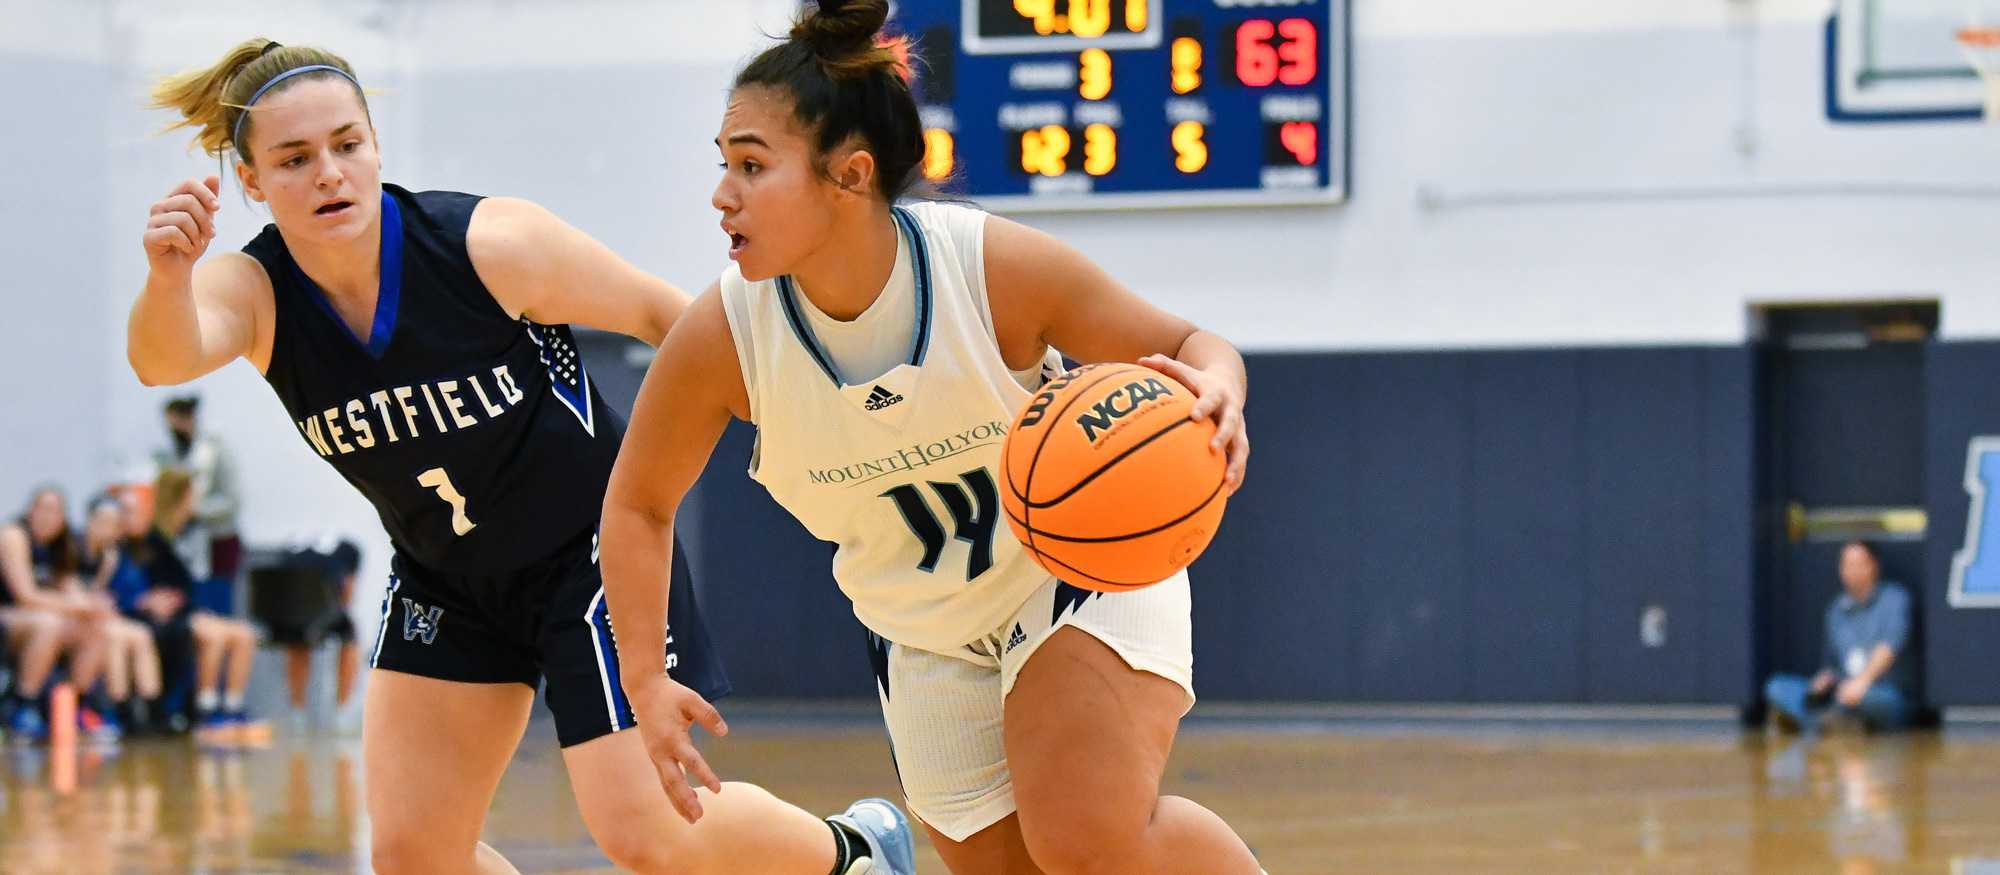 Marley Berano scored 14 points to lead Mount Holyoke against Dean on Nov. 11, 2023. (RJB Sports file photo)